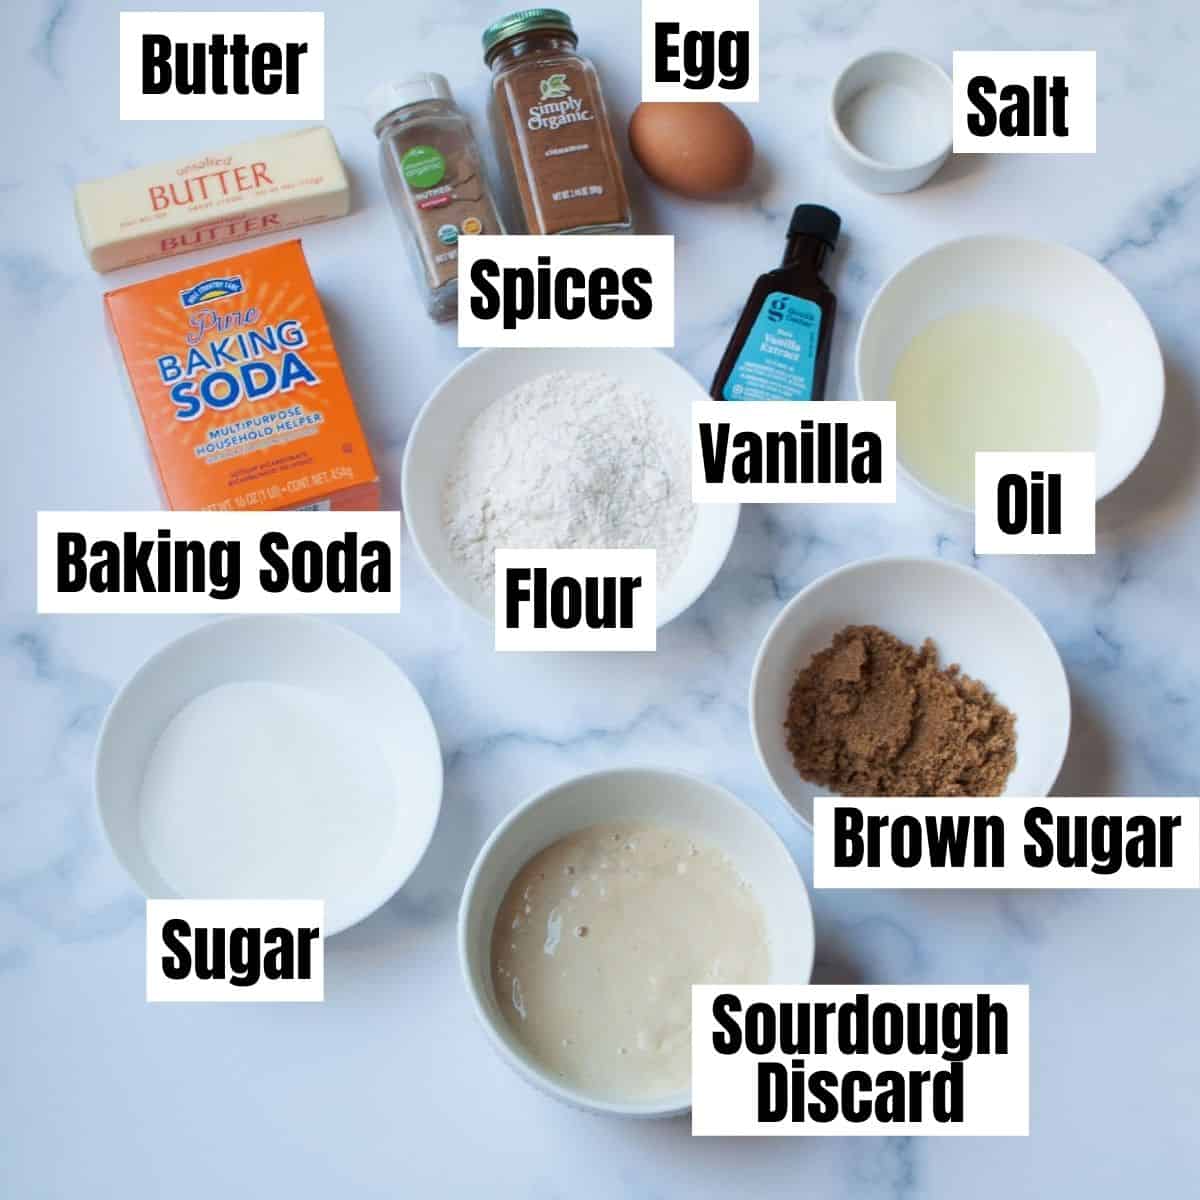 ingredients needed to make Sourdough Discard Coffee Cake